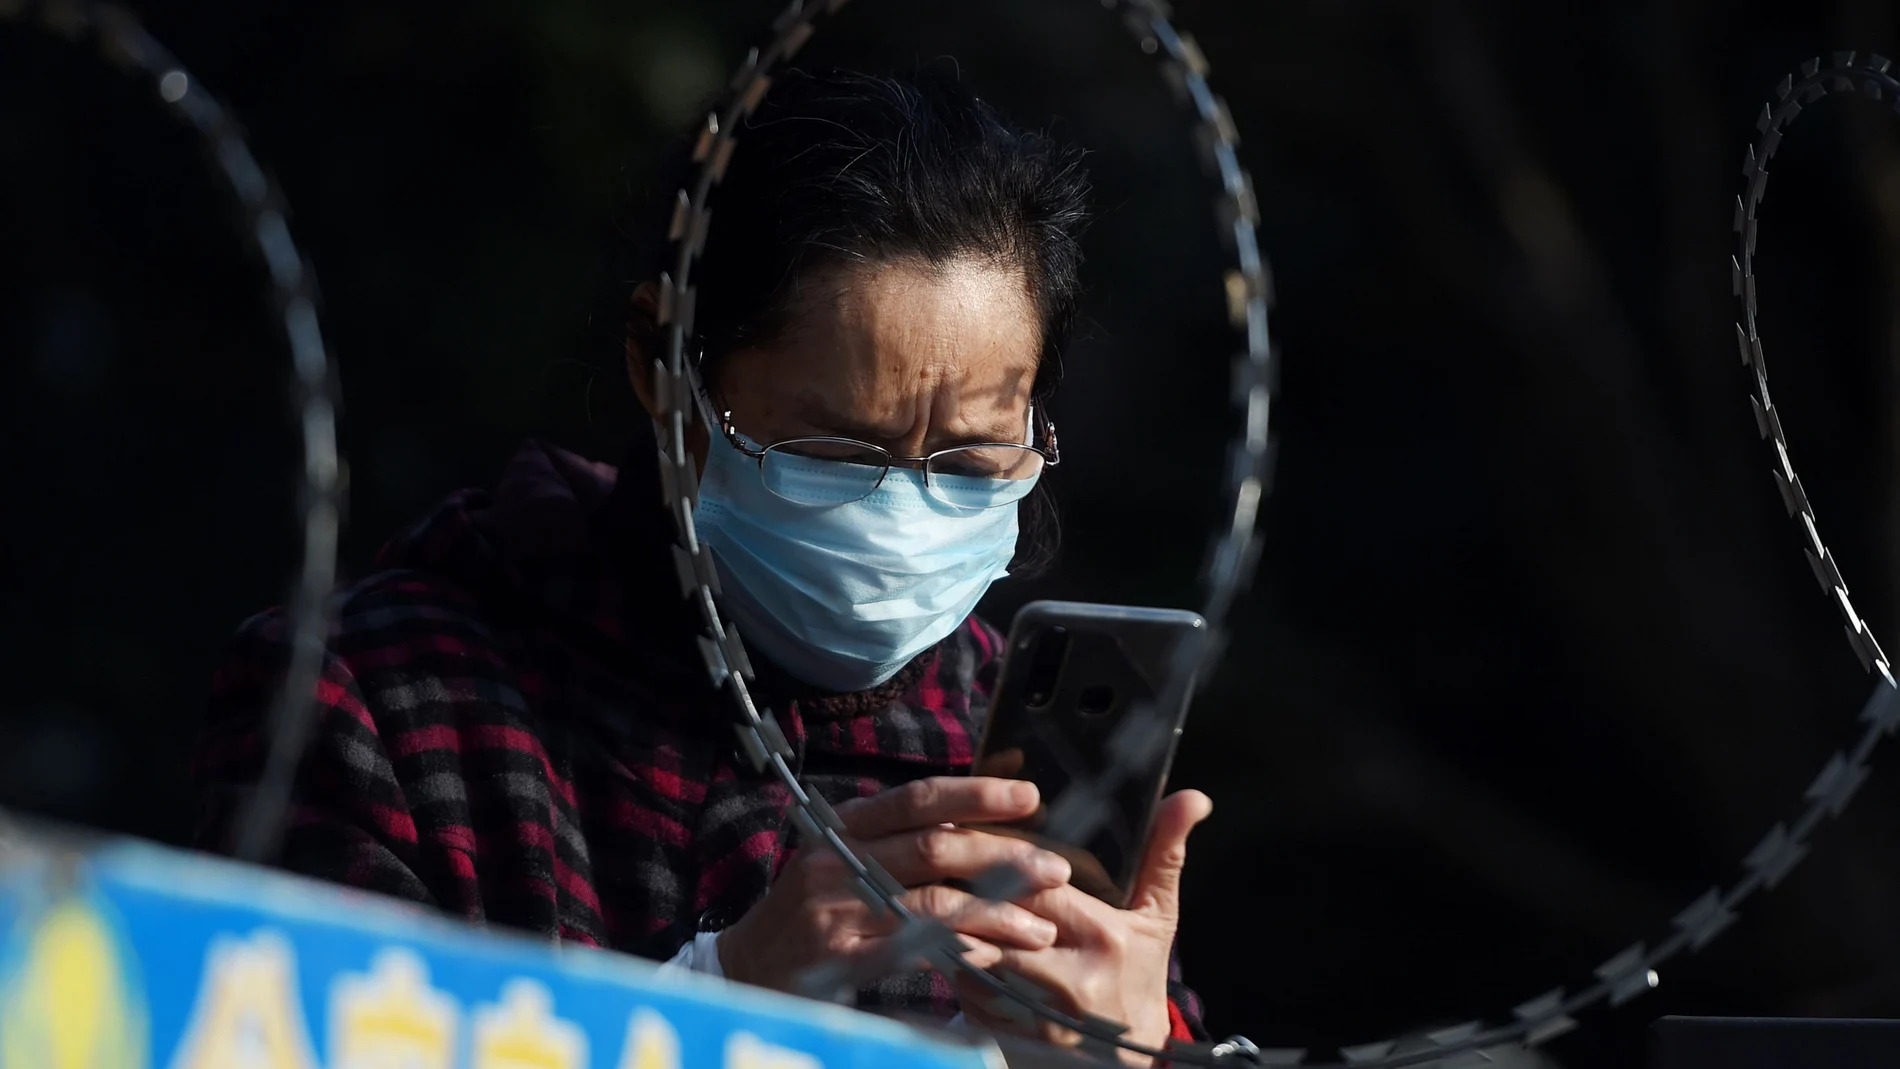 FILE PHOTO: A woman uses her mobile phone behind barbed wire at an entrance of a residential compound in Wuhan